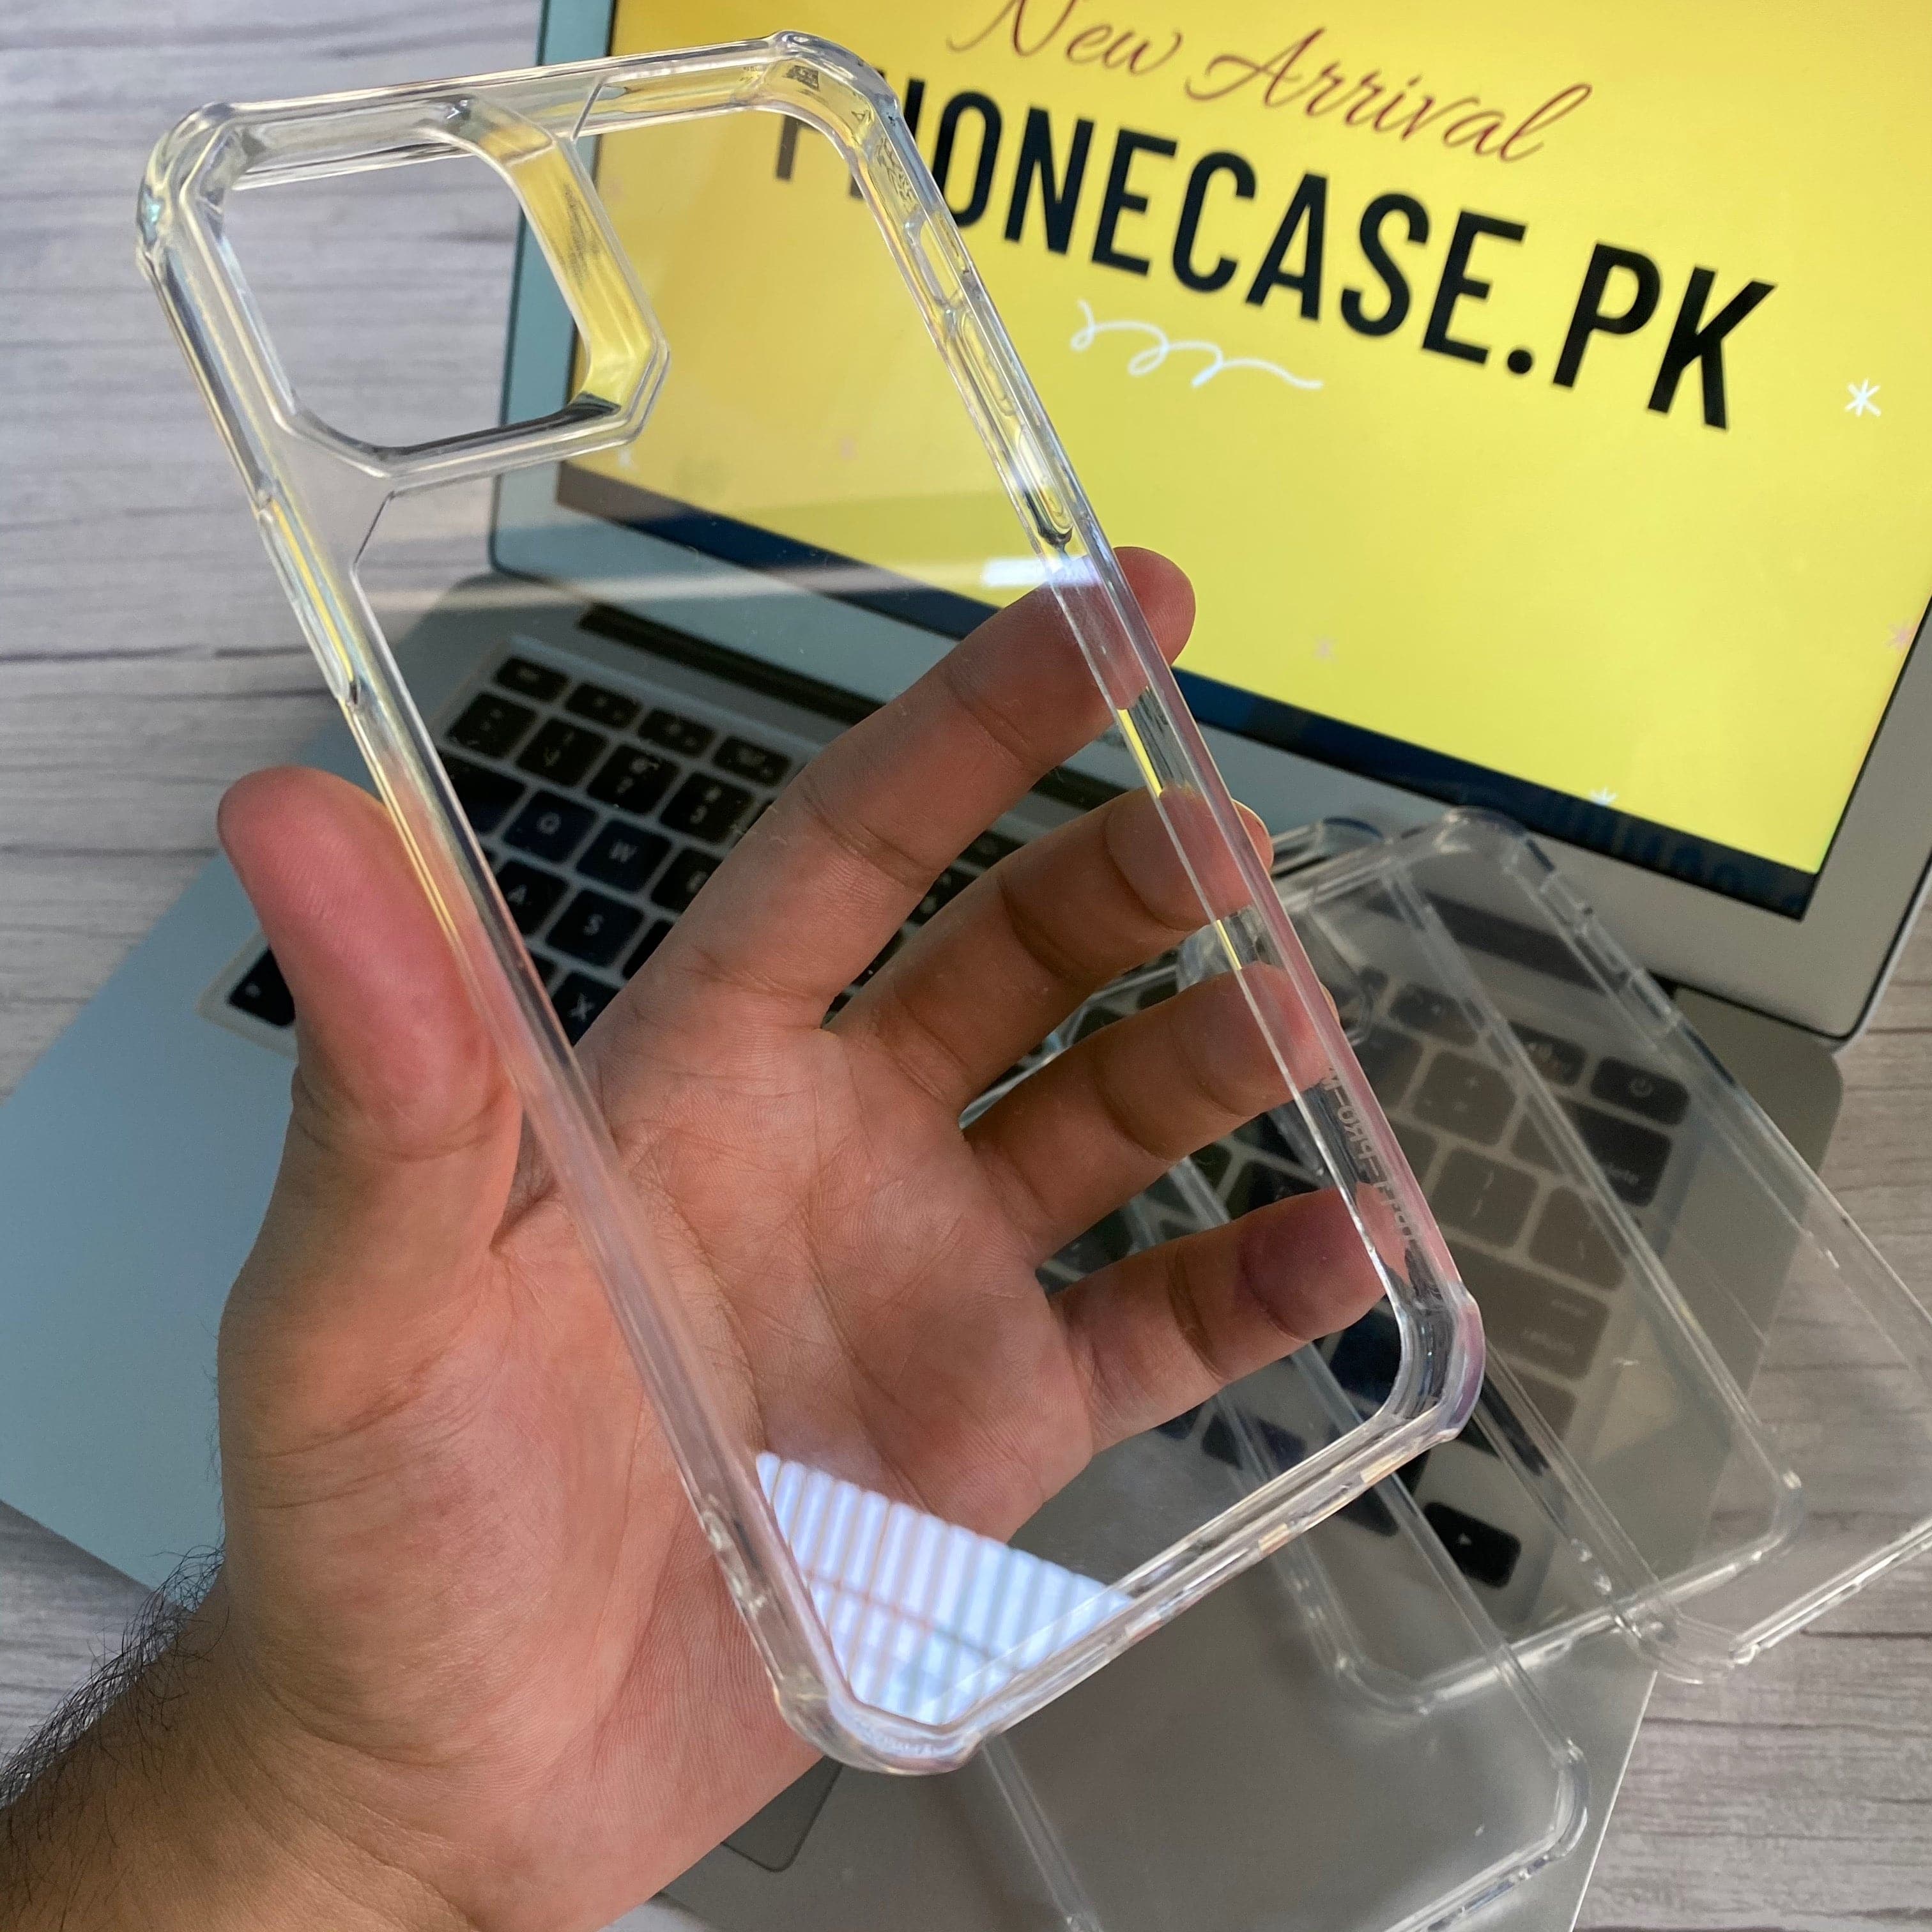 Armor Bumper Ultra Clear Case for iPhone Models